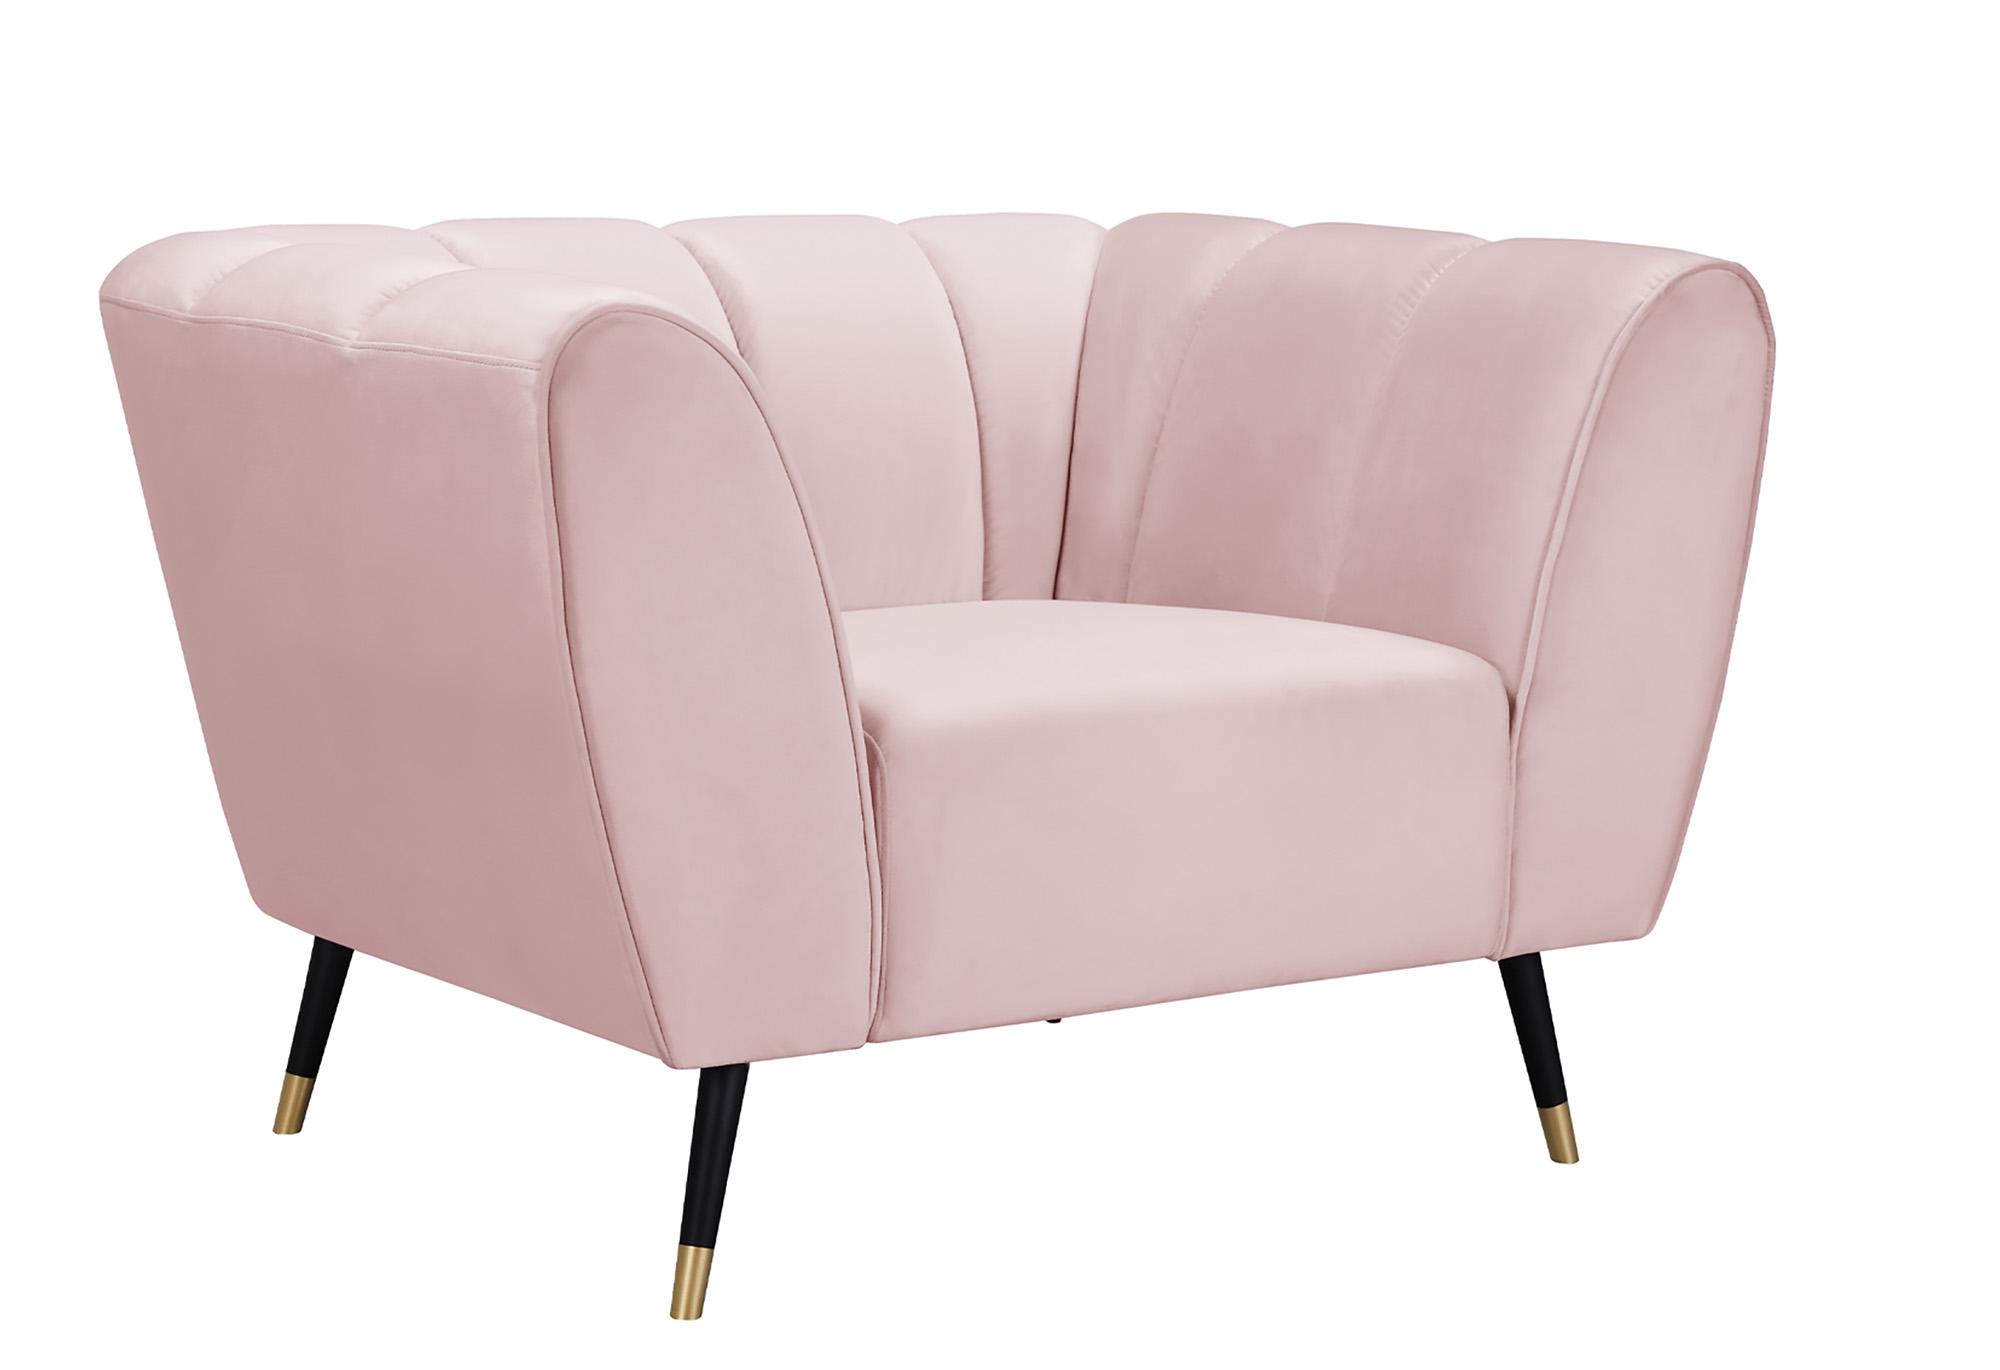 Contemporary, Modern Arm Chair BEAUMONT 626Pink-C 626Pink-C in Pink Velvet